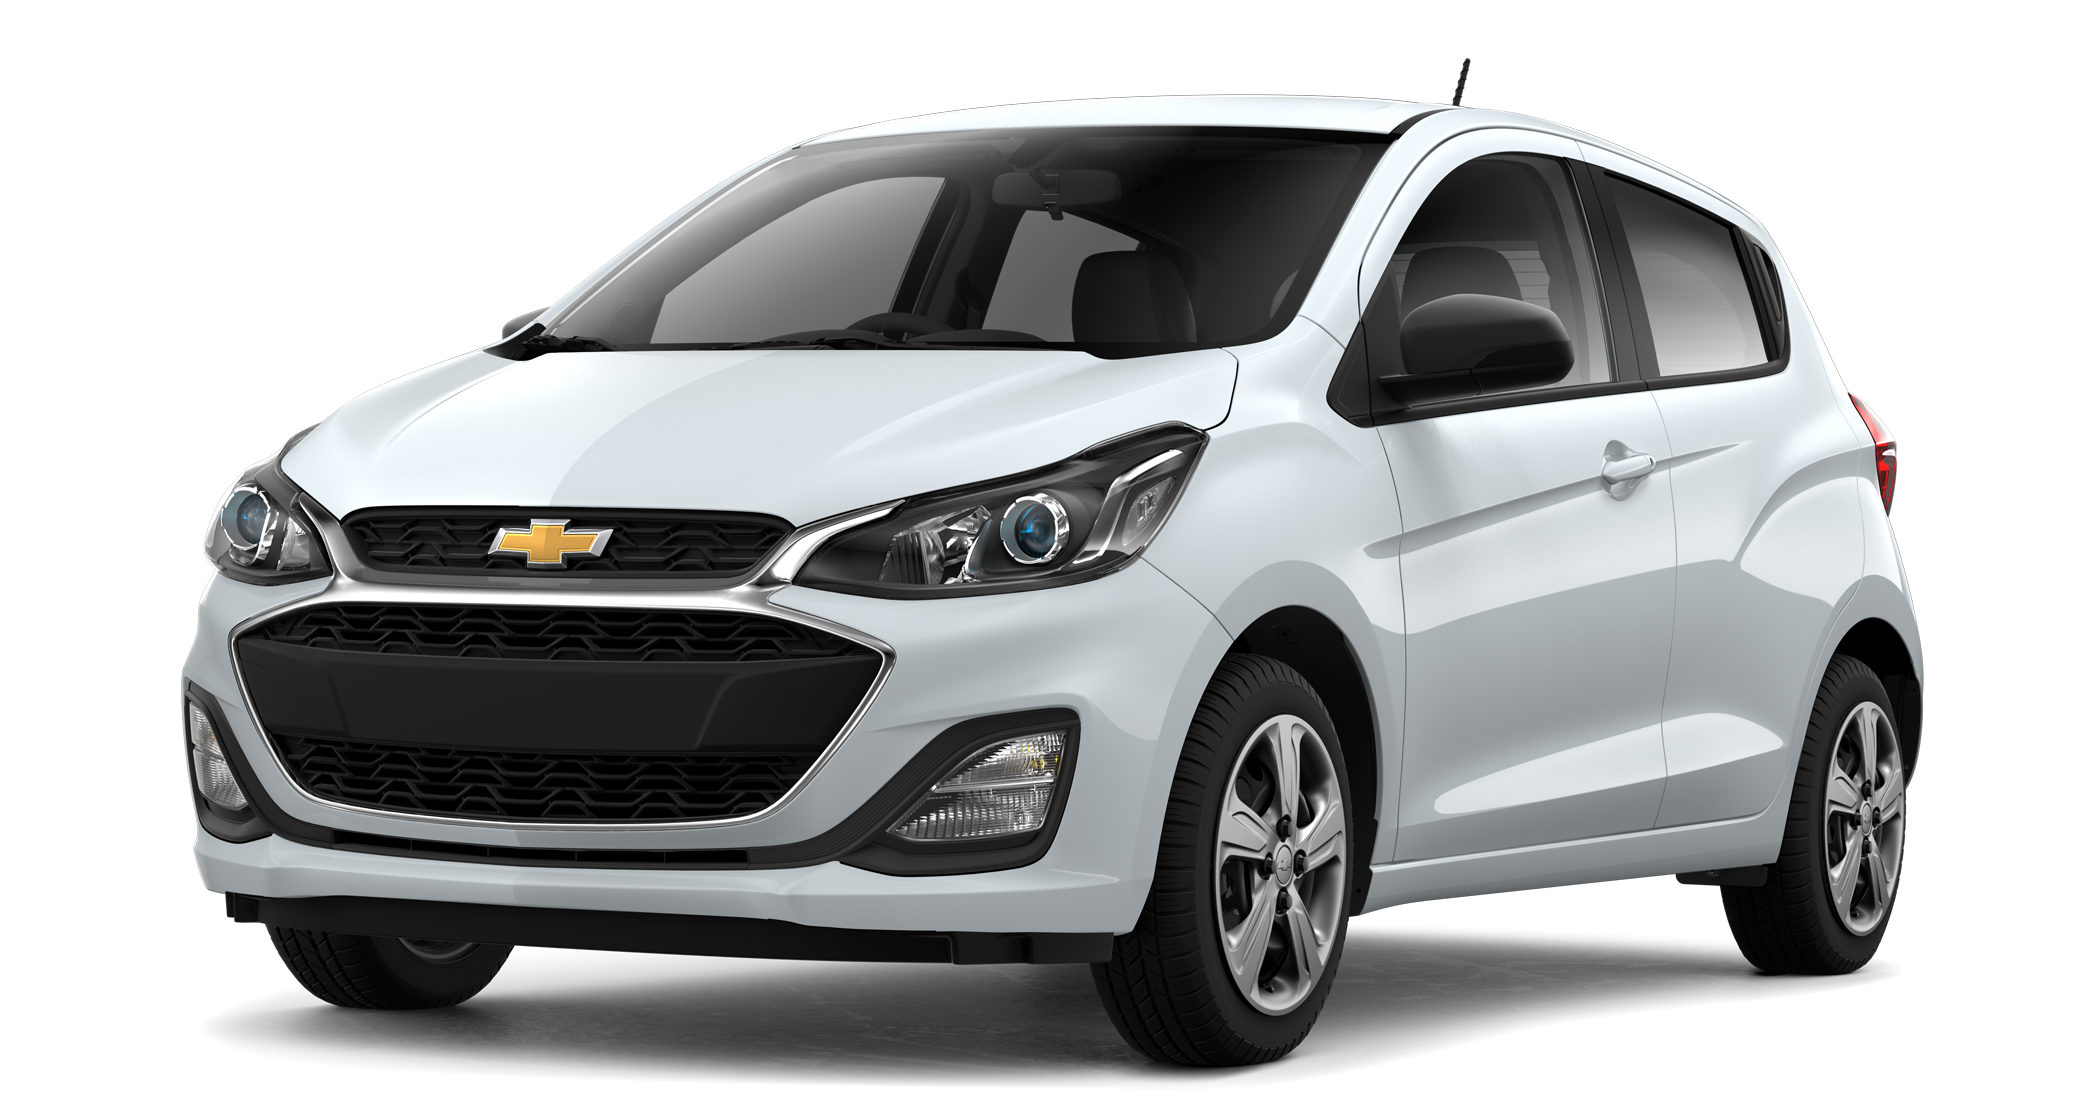 2019 Chevrolet Spark Incentives, Specials & Offers in Lake Charles LA